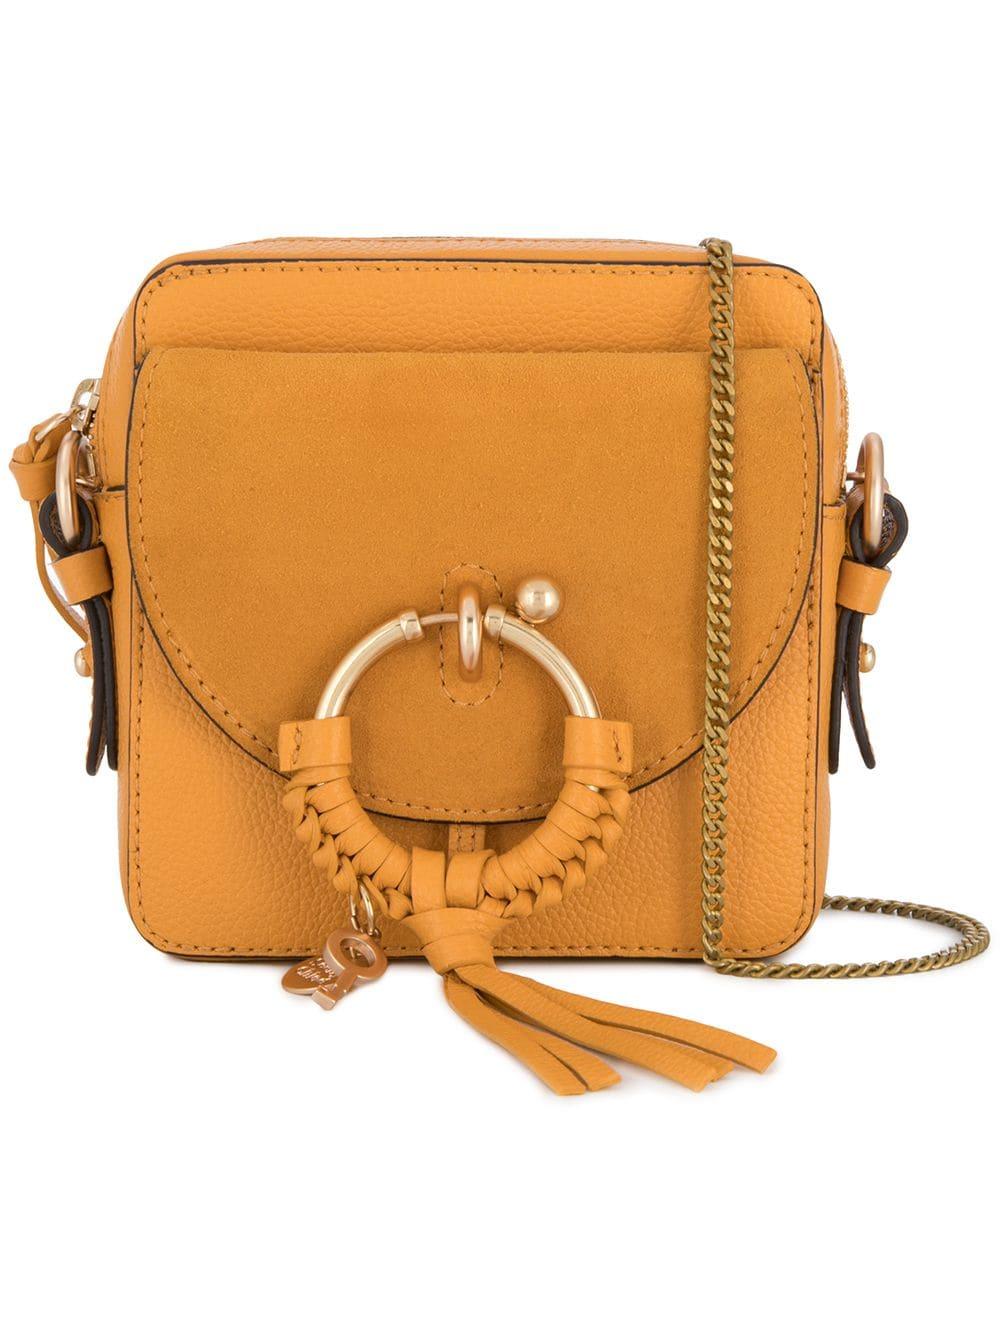 See By Chloé Suede Joan Camera Bag in Yellow - Save 39% - Lyst